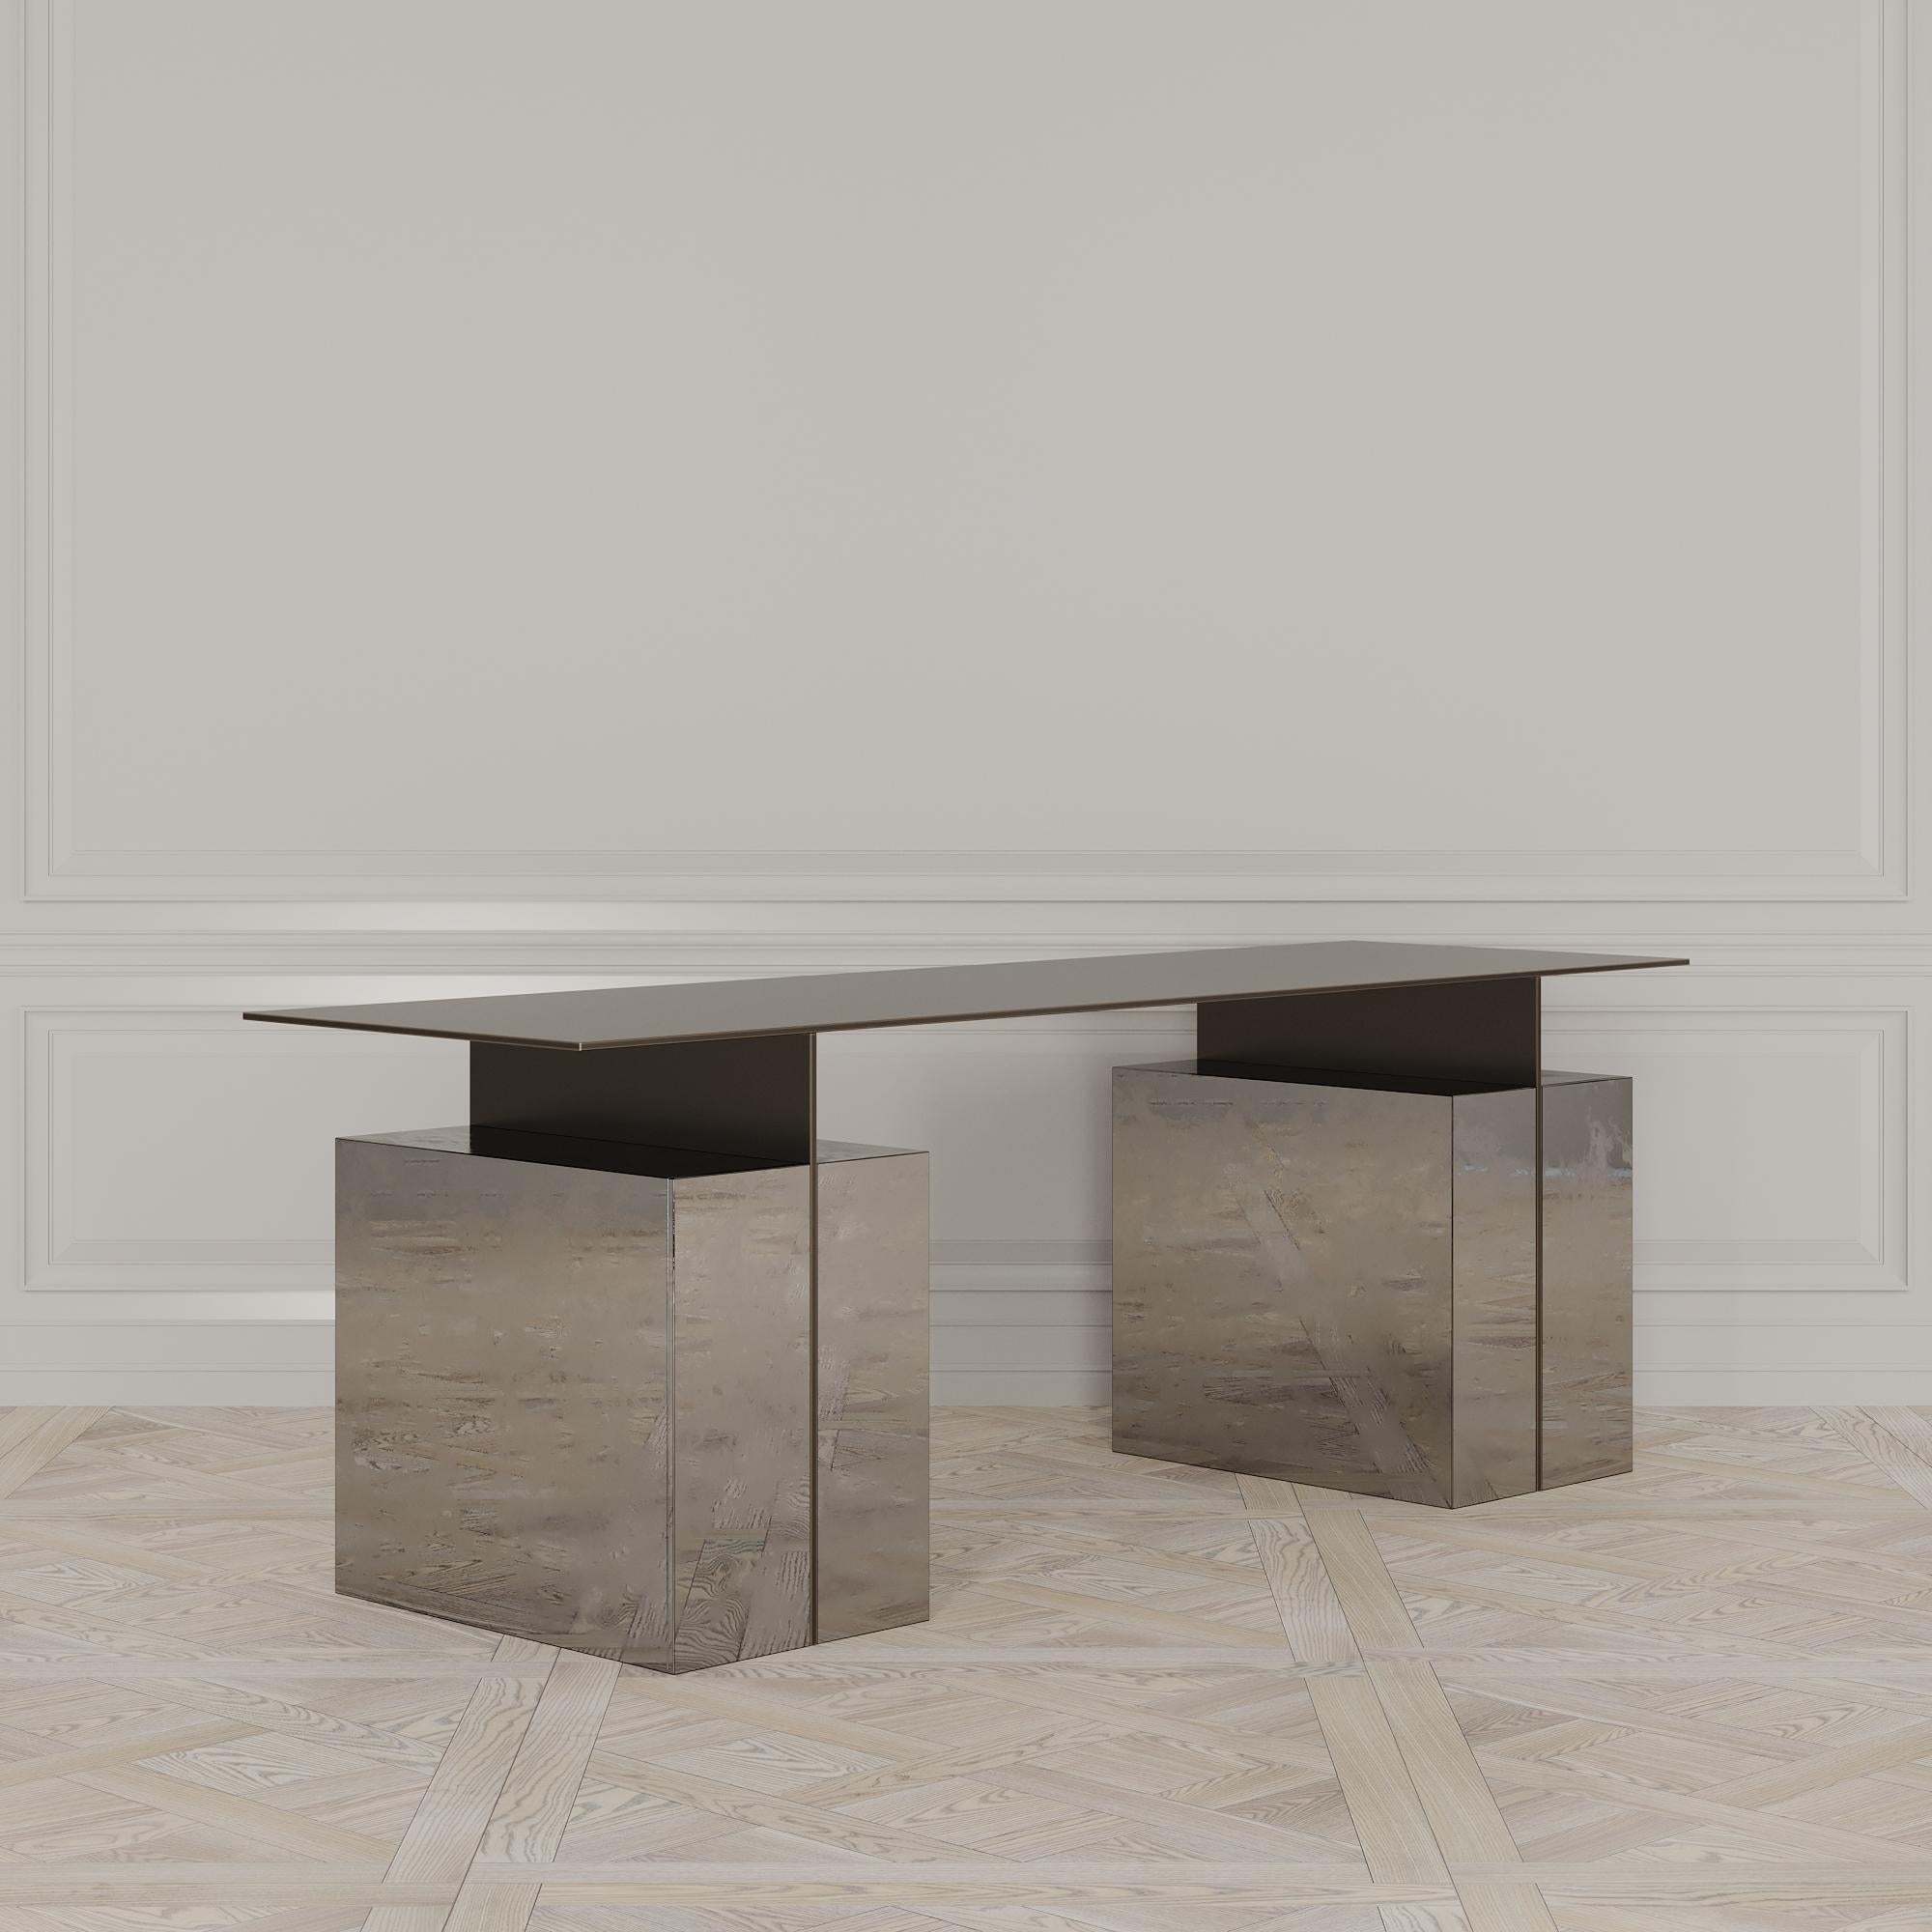 The Meridiem desk is designed by Emél & Browne in the Minimalist and contemporary style and custom made in Italy by skilled artisans.

The Meridiem desk reflects the transition from midnight to the coming dawn. The essence of this transcendent